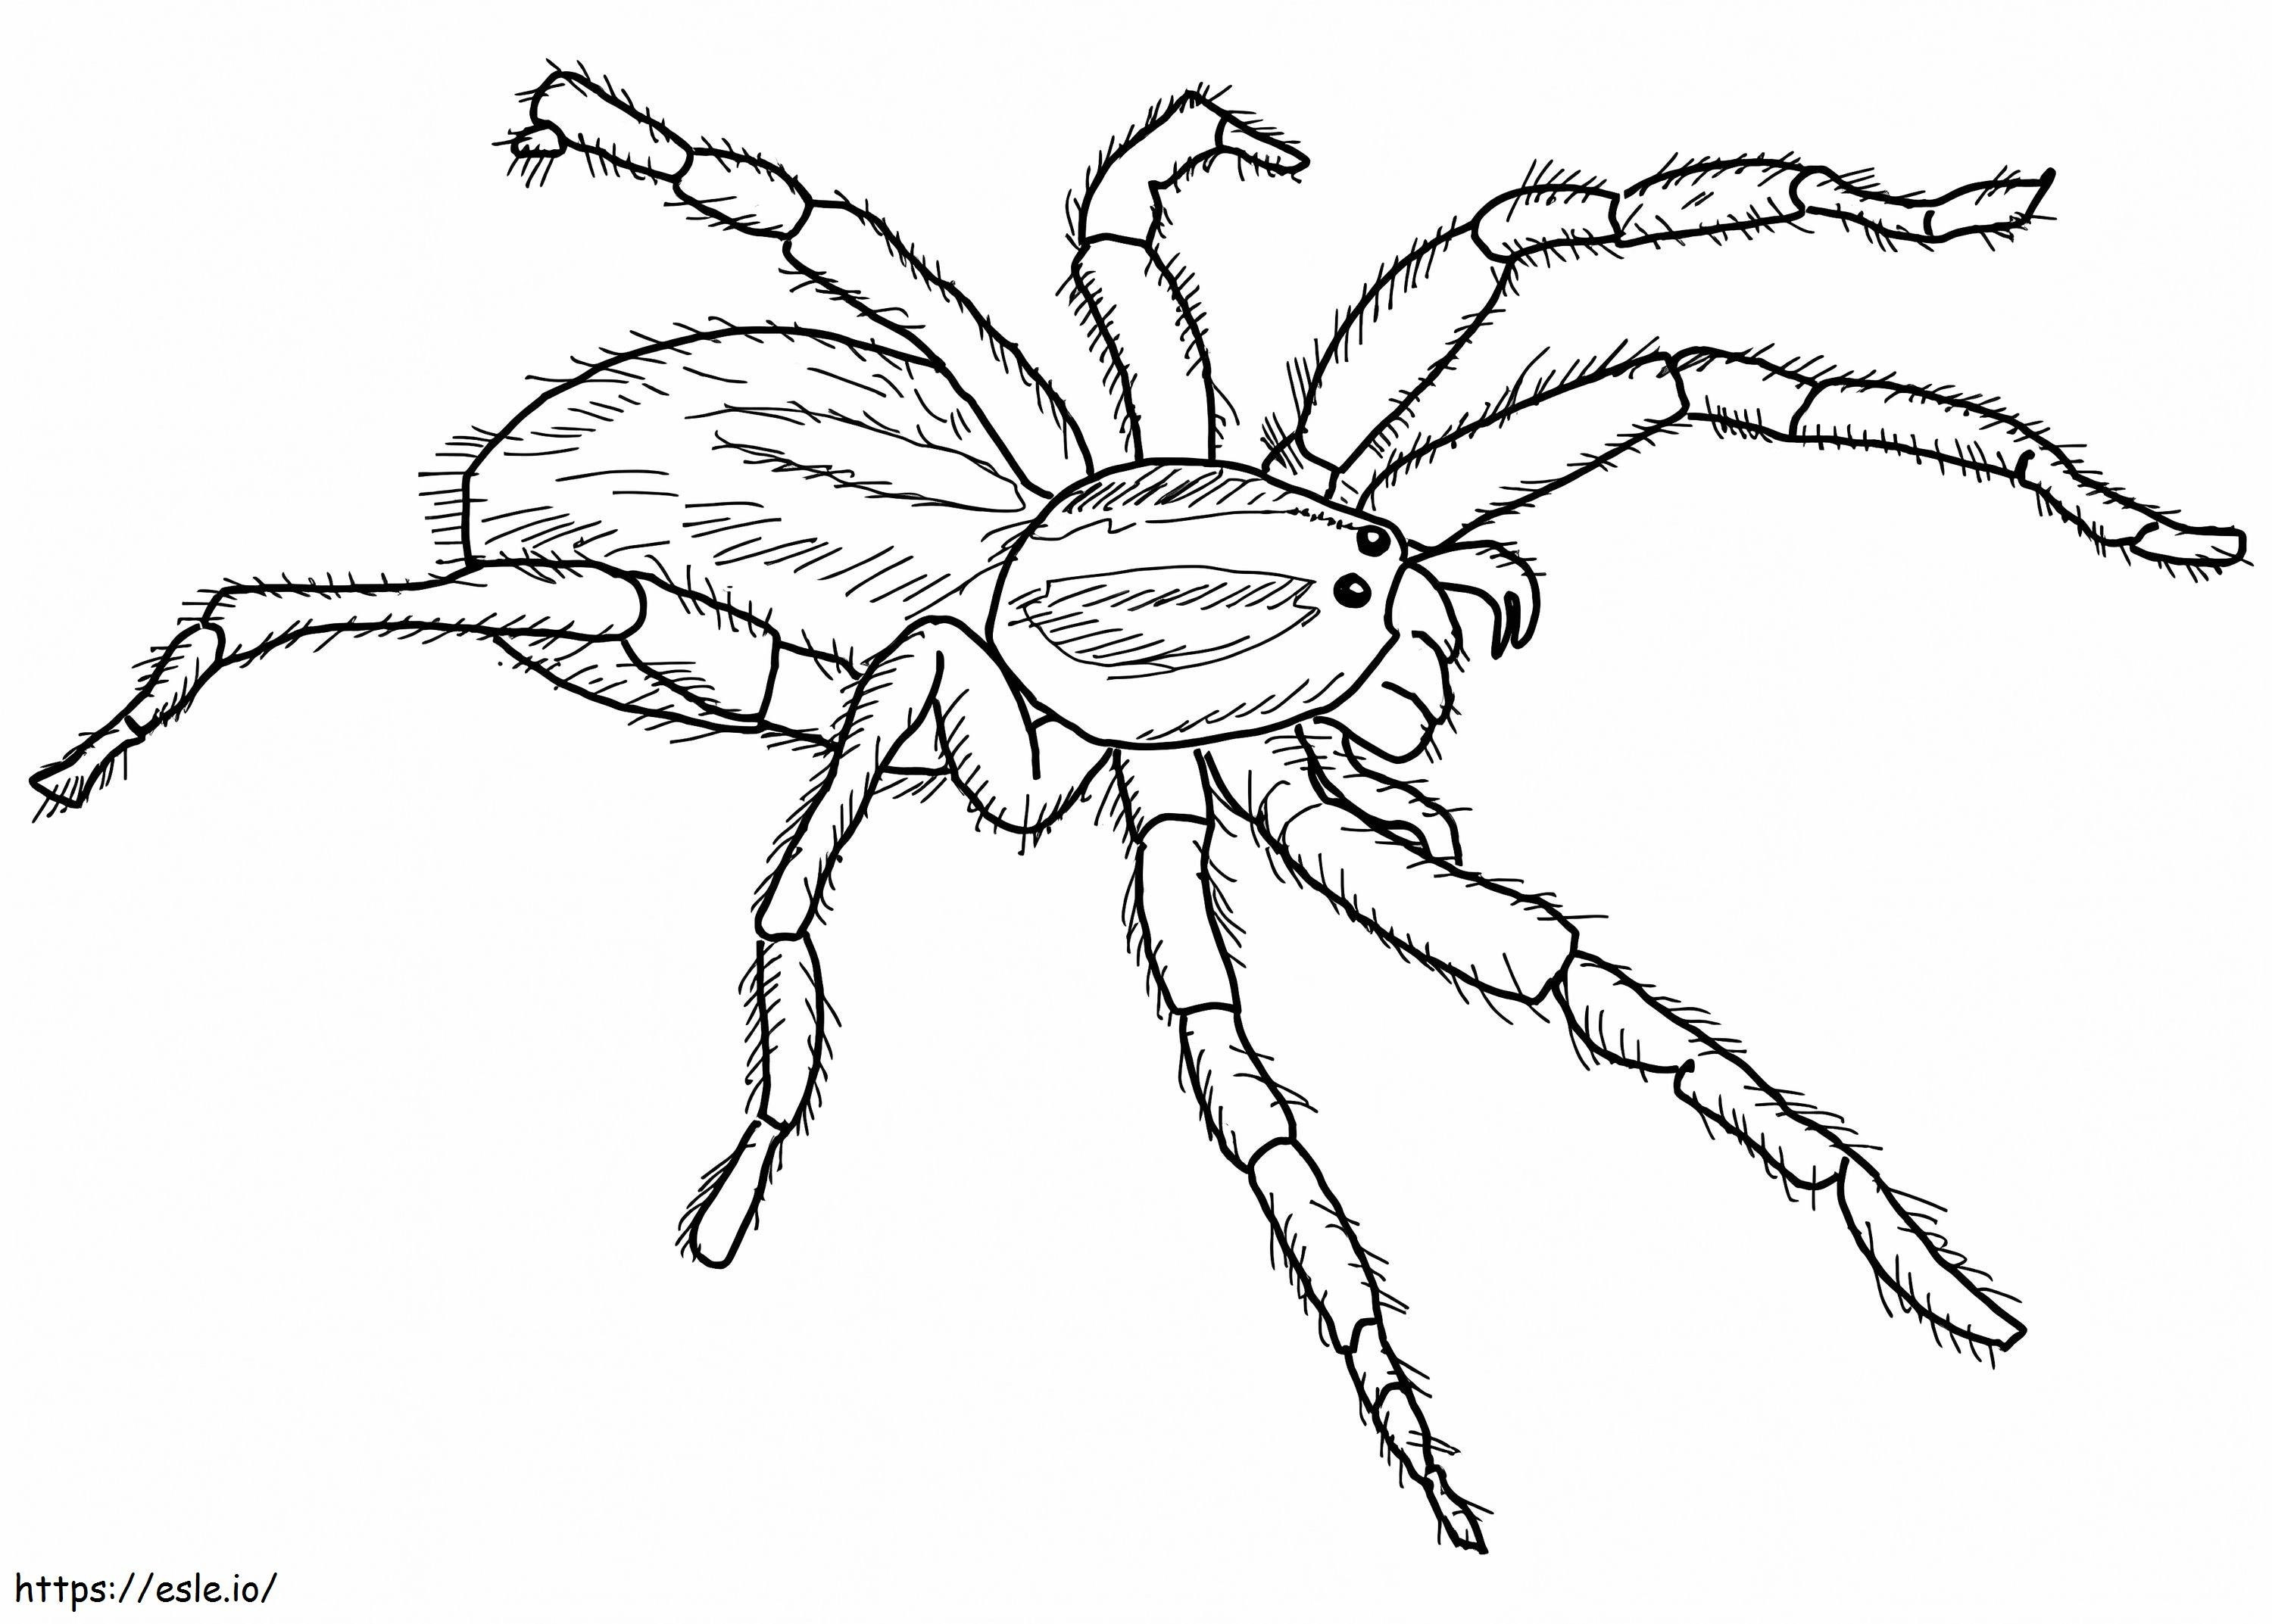 Carolina Wolf Spider coloring page